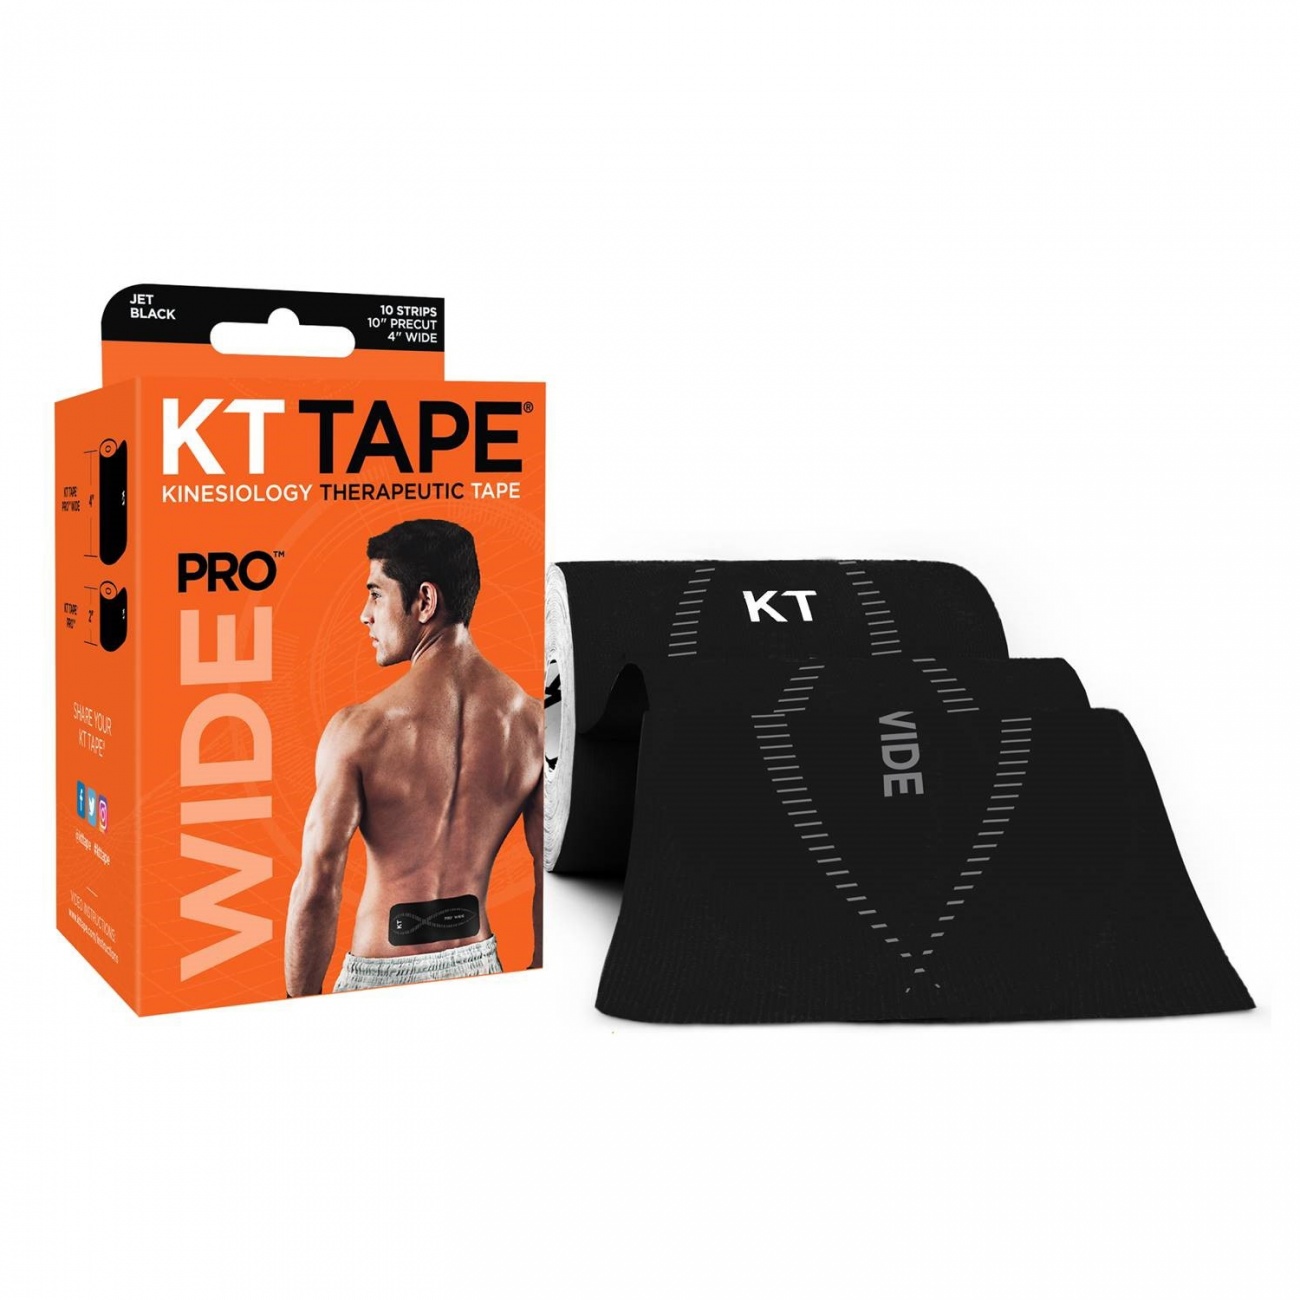 KT Tape Pro Wide Jet Black Box and Roll MAIN